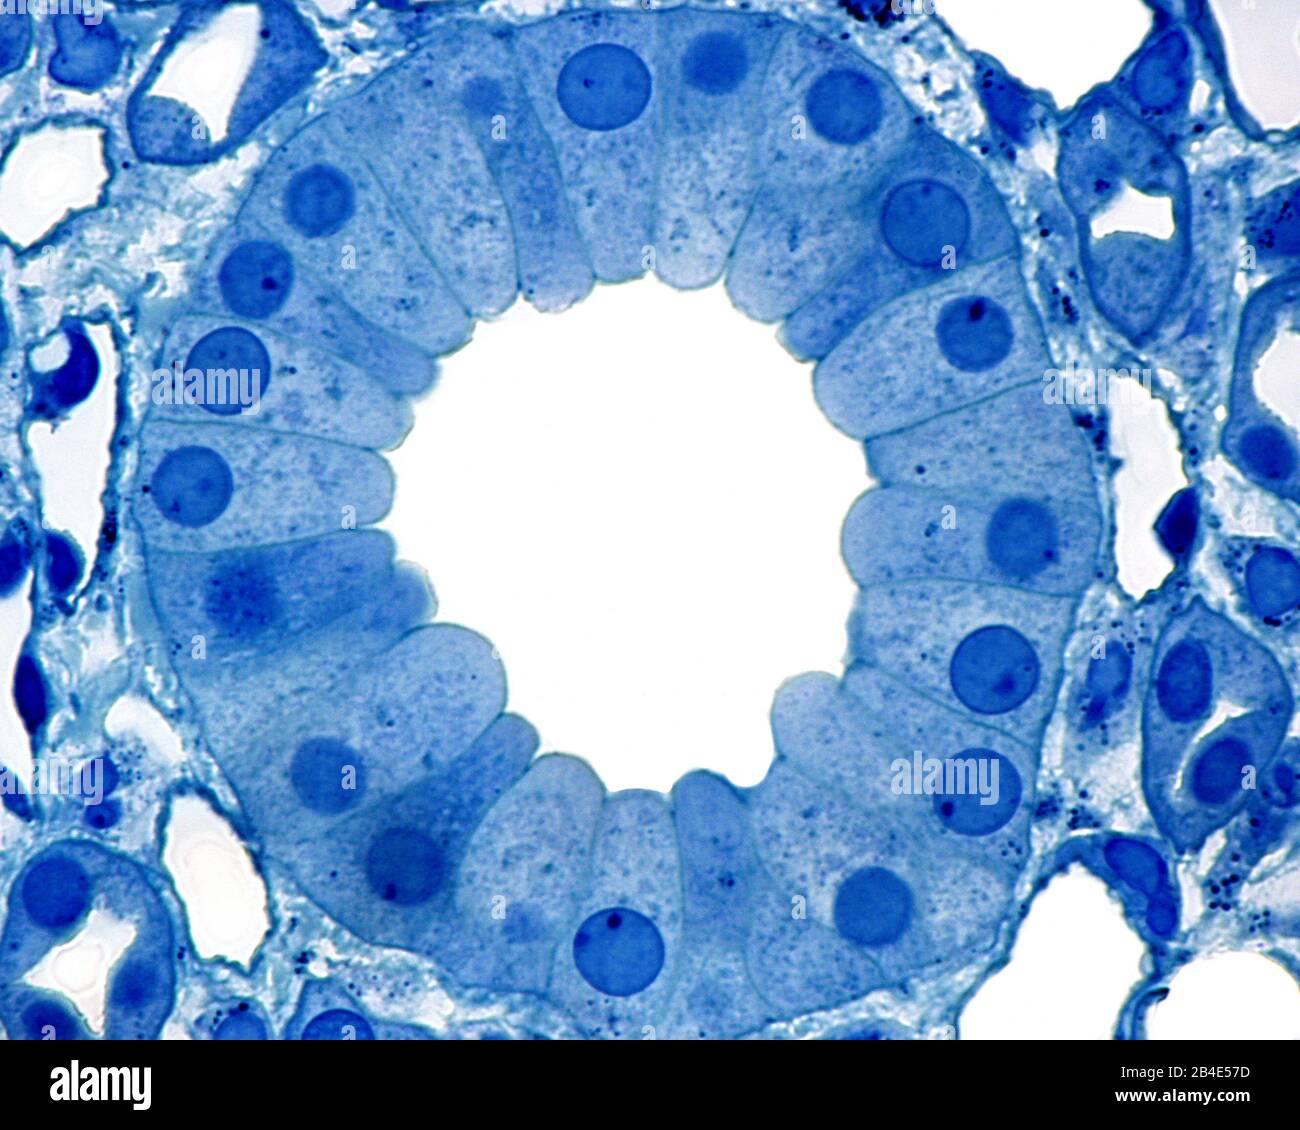 Cross section of a collecting duct, located in the medullary region of the kidney. It is lined by a simple columnar epithelium. Stock Photo